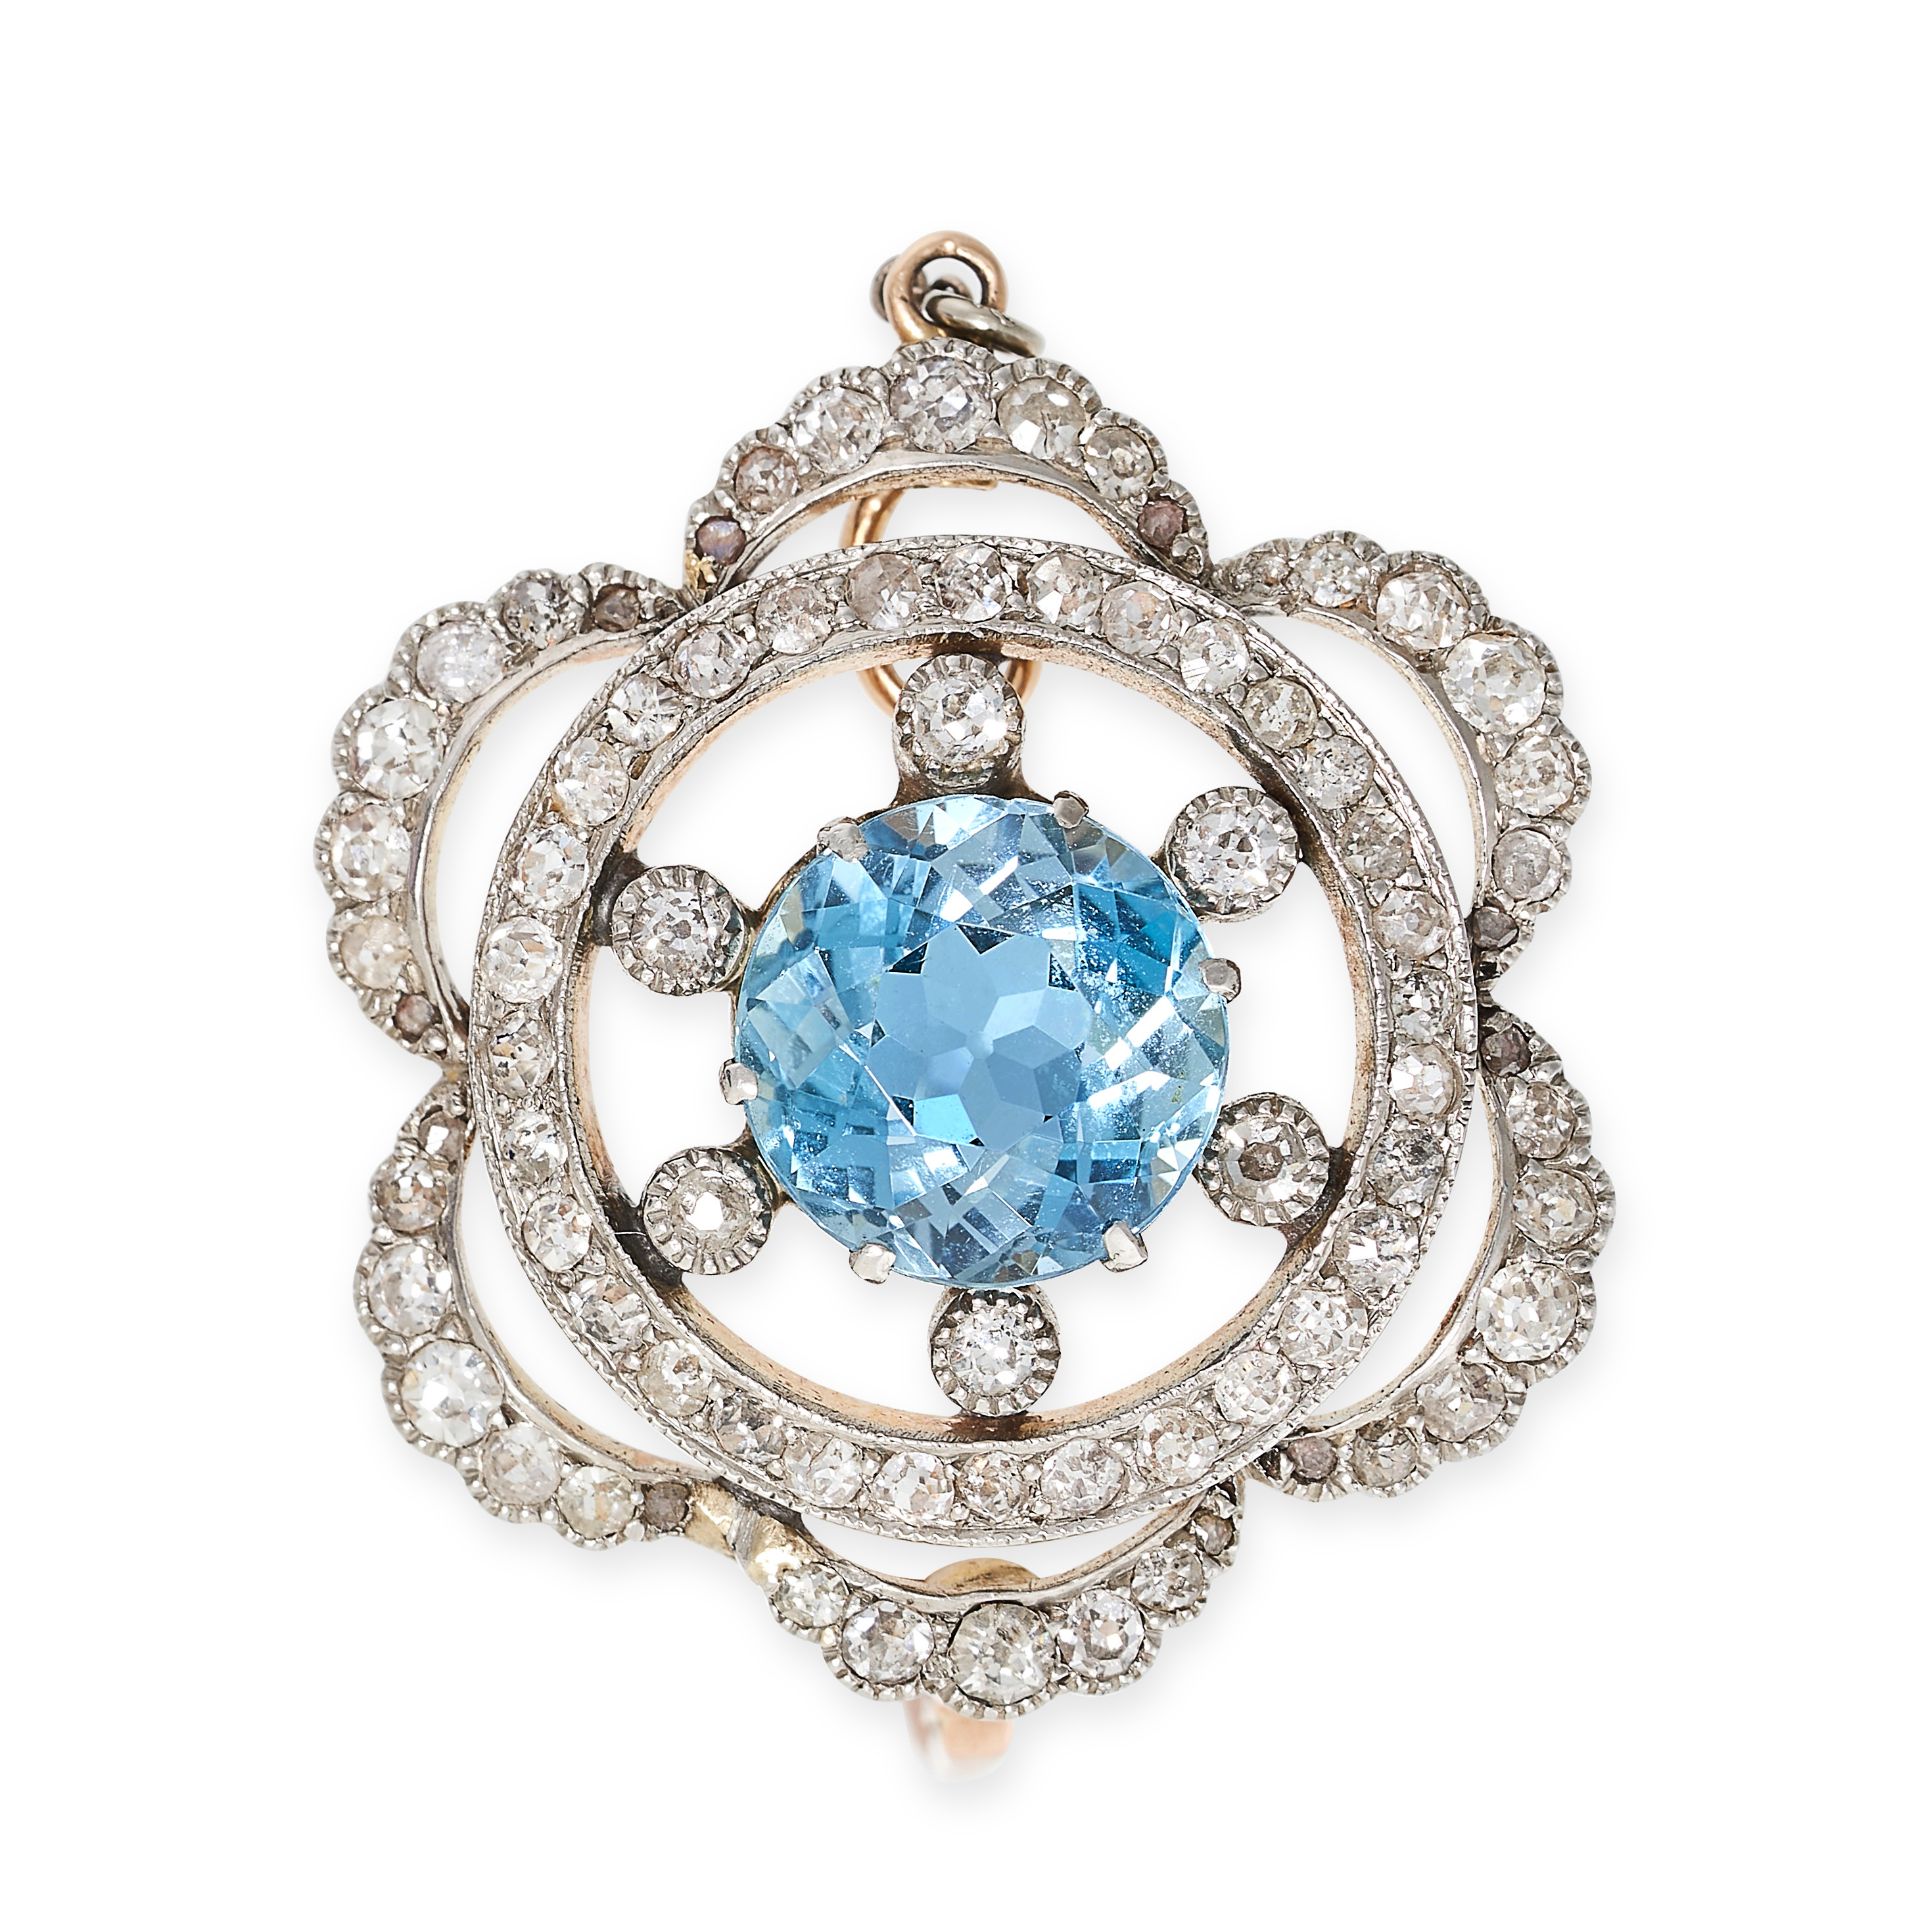 AN AQUAMARINE AND DIAMOND BROOCH set with a central round cut aquamarine within a circular and